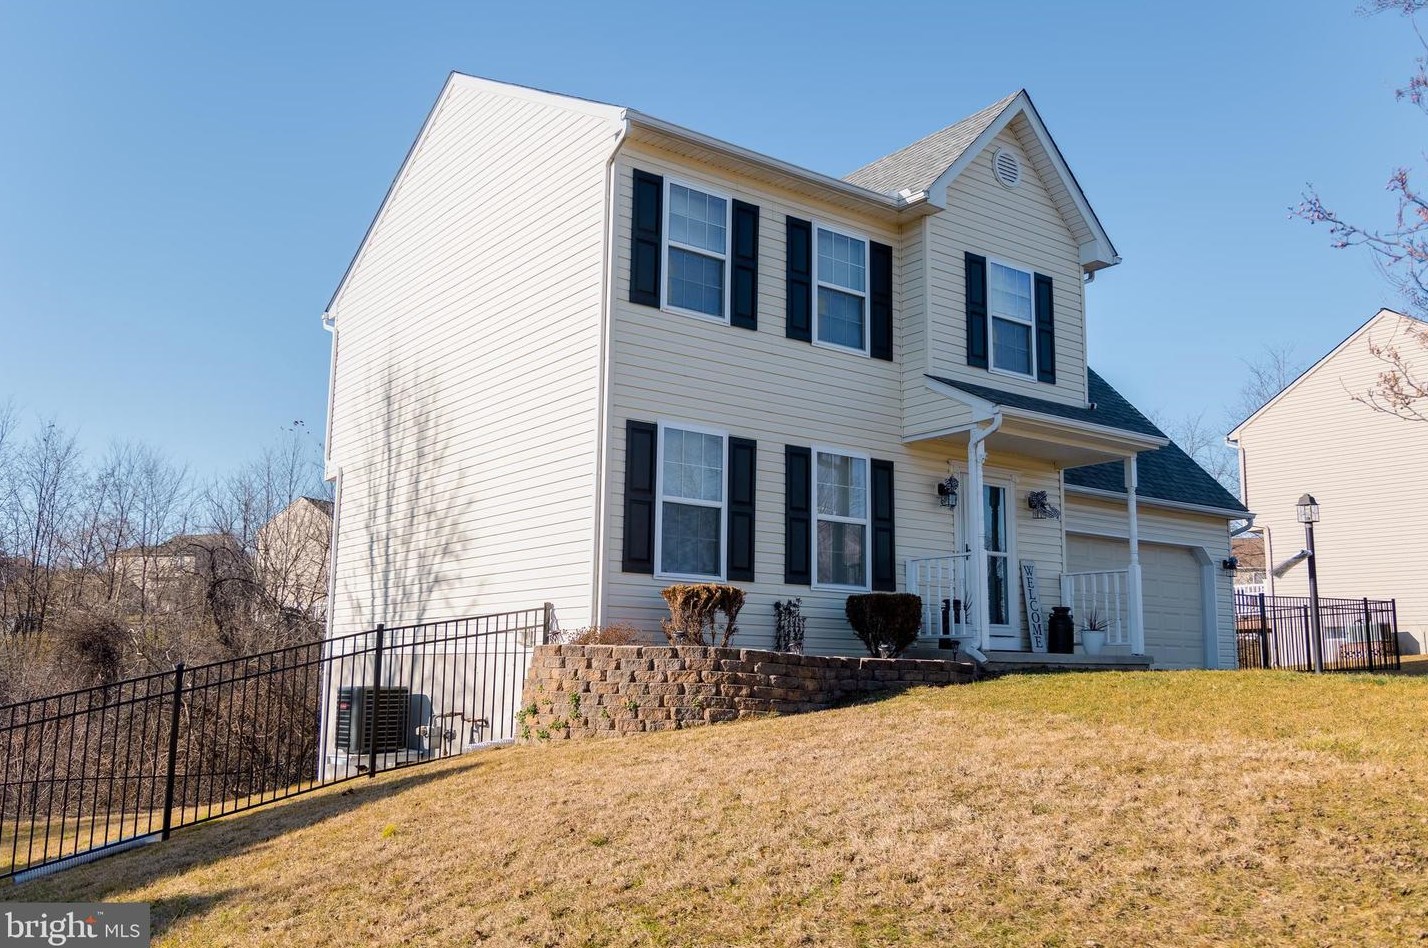 20 Burberry Ln, Mount Wolf PA  17347-9590 exterior